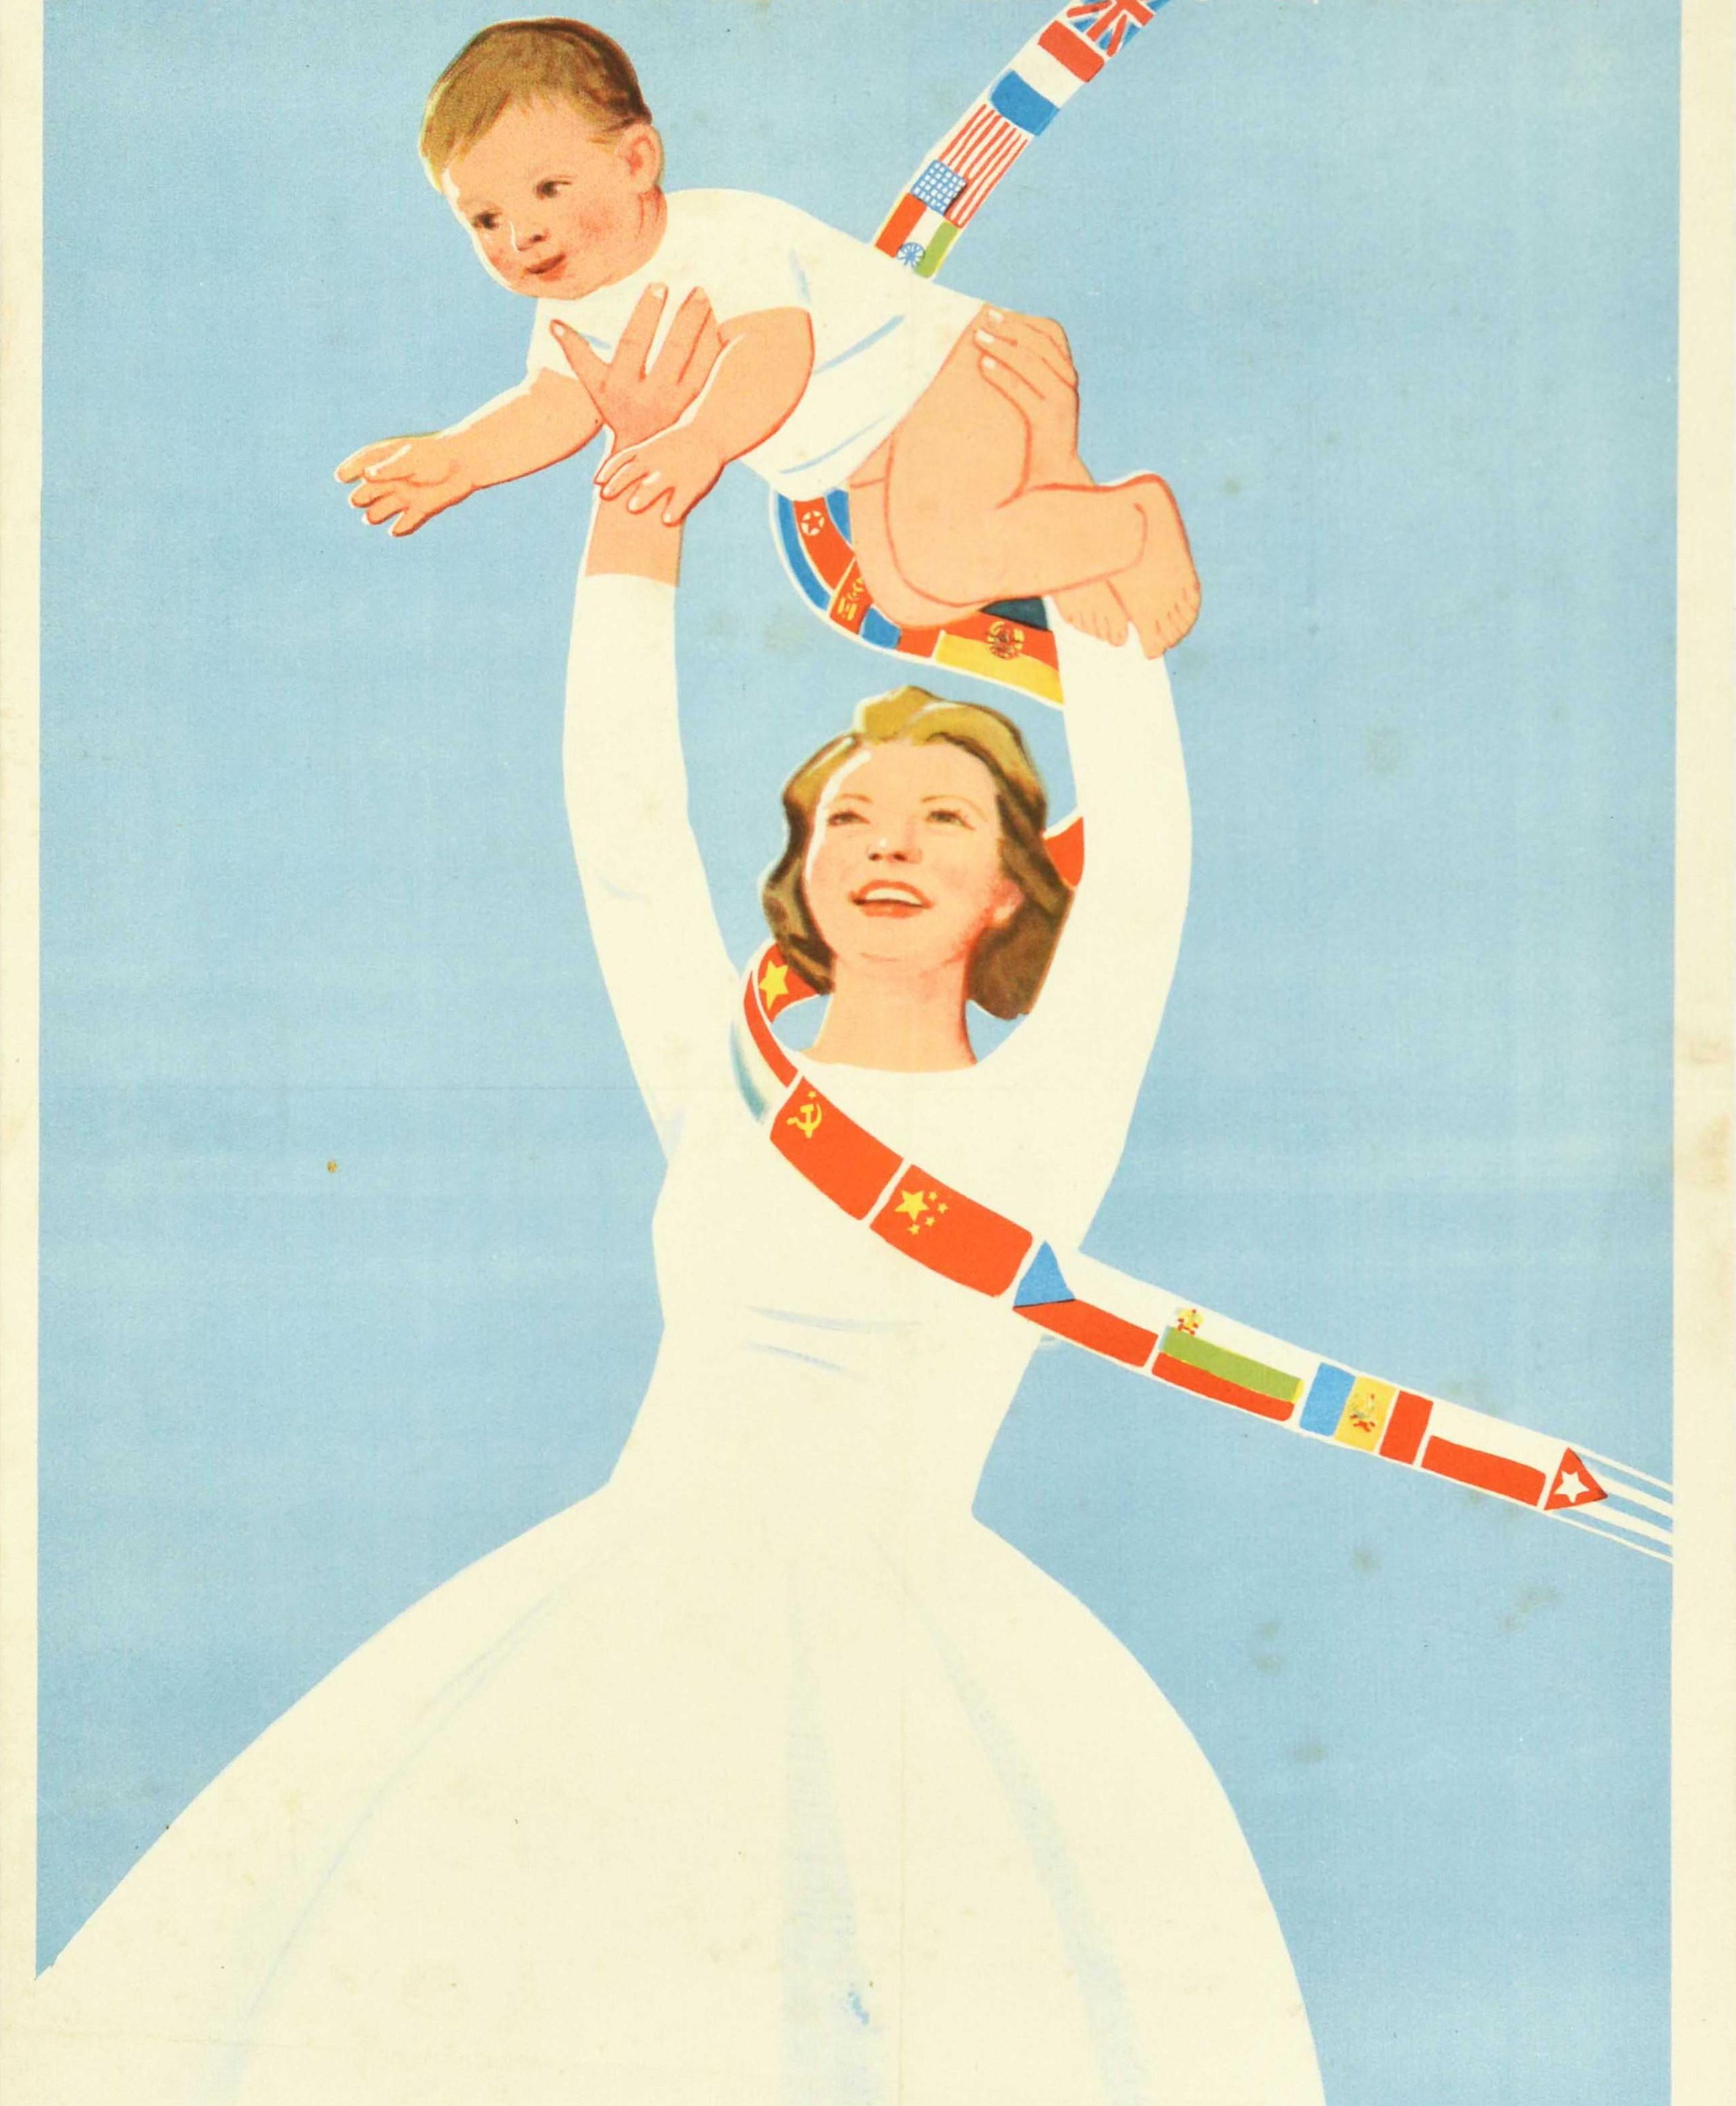 Original Vintage Poster International Children's Day For Life For Happiness USSR - Gray Print by Belopolsky